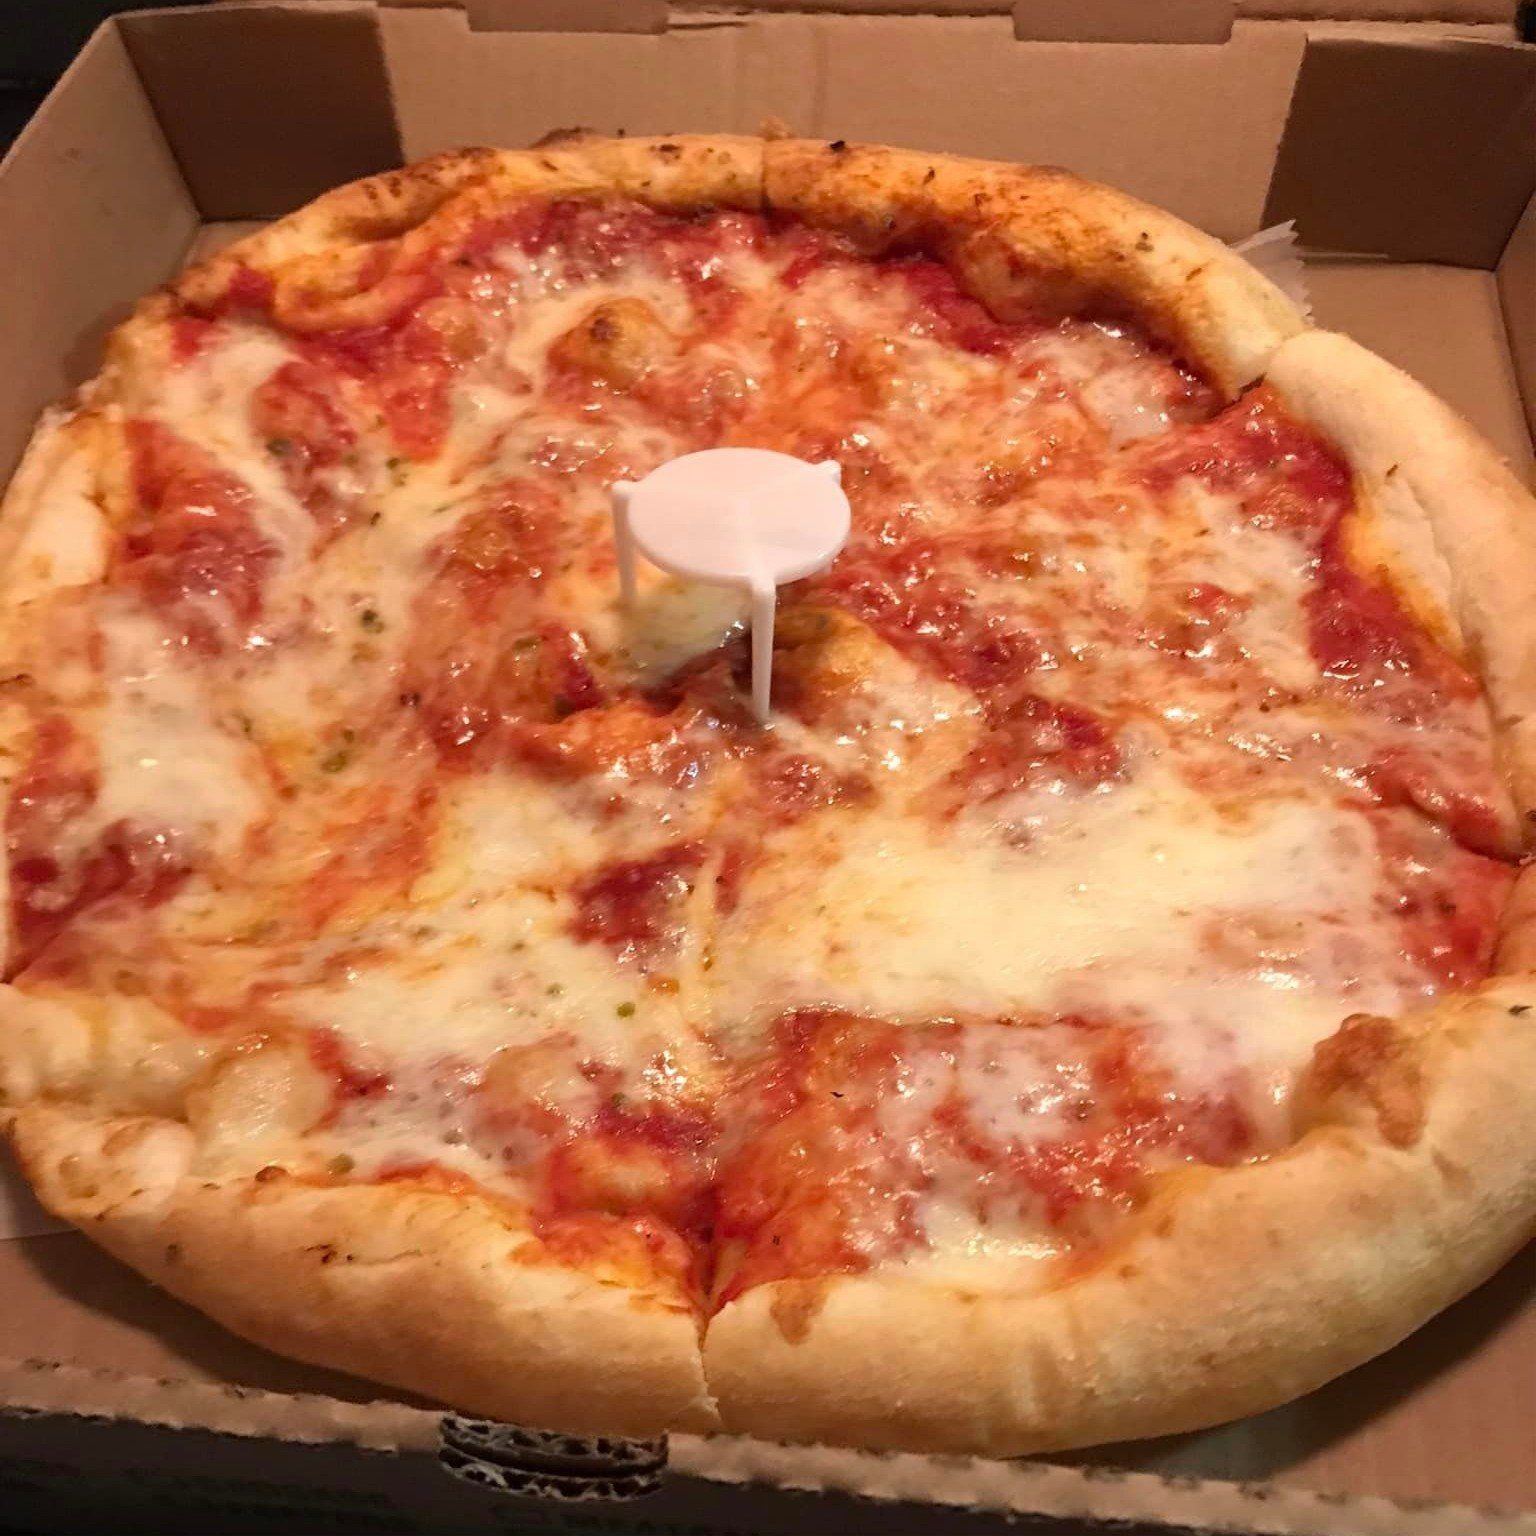 🧀 Cheese whiz, this is gonna be awesome&hellip; Get ready to take a cheesy trip to happiness with our incredible cheese pizza! Each bite is a slice of pure joy, loaded with ooey-gooey goodness that'll make your taste buds do the happy dance! (Photo 